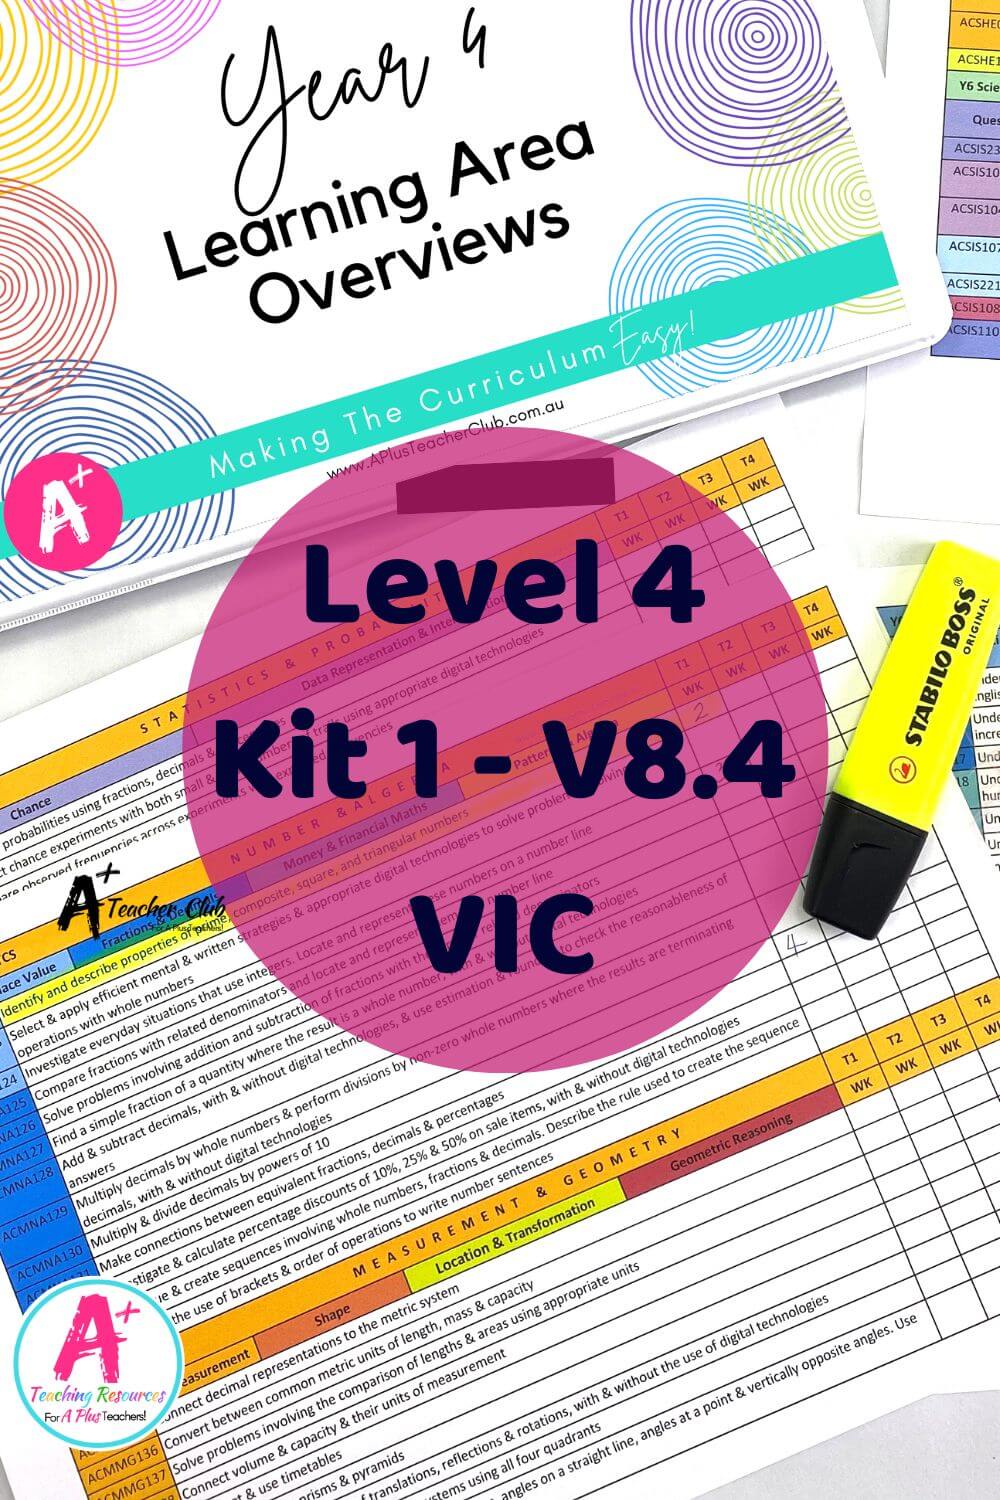 Level 4 Forward Planning Curriculum Overview VIC 8.4